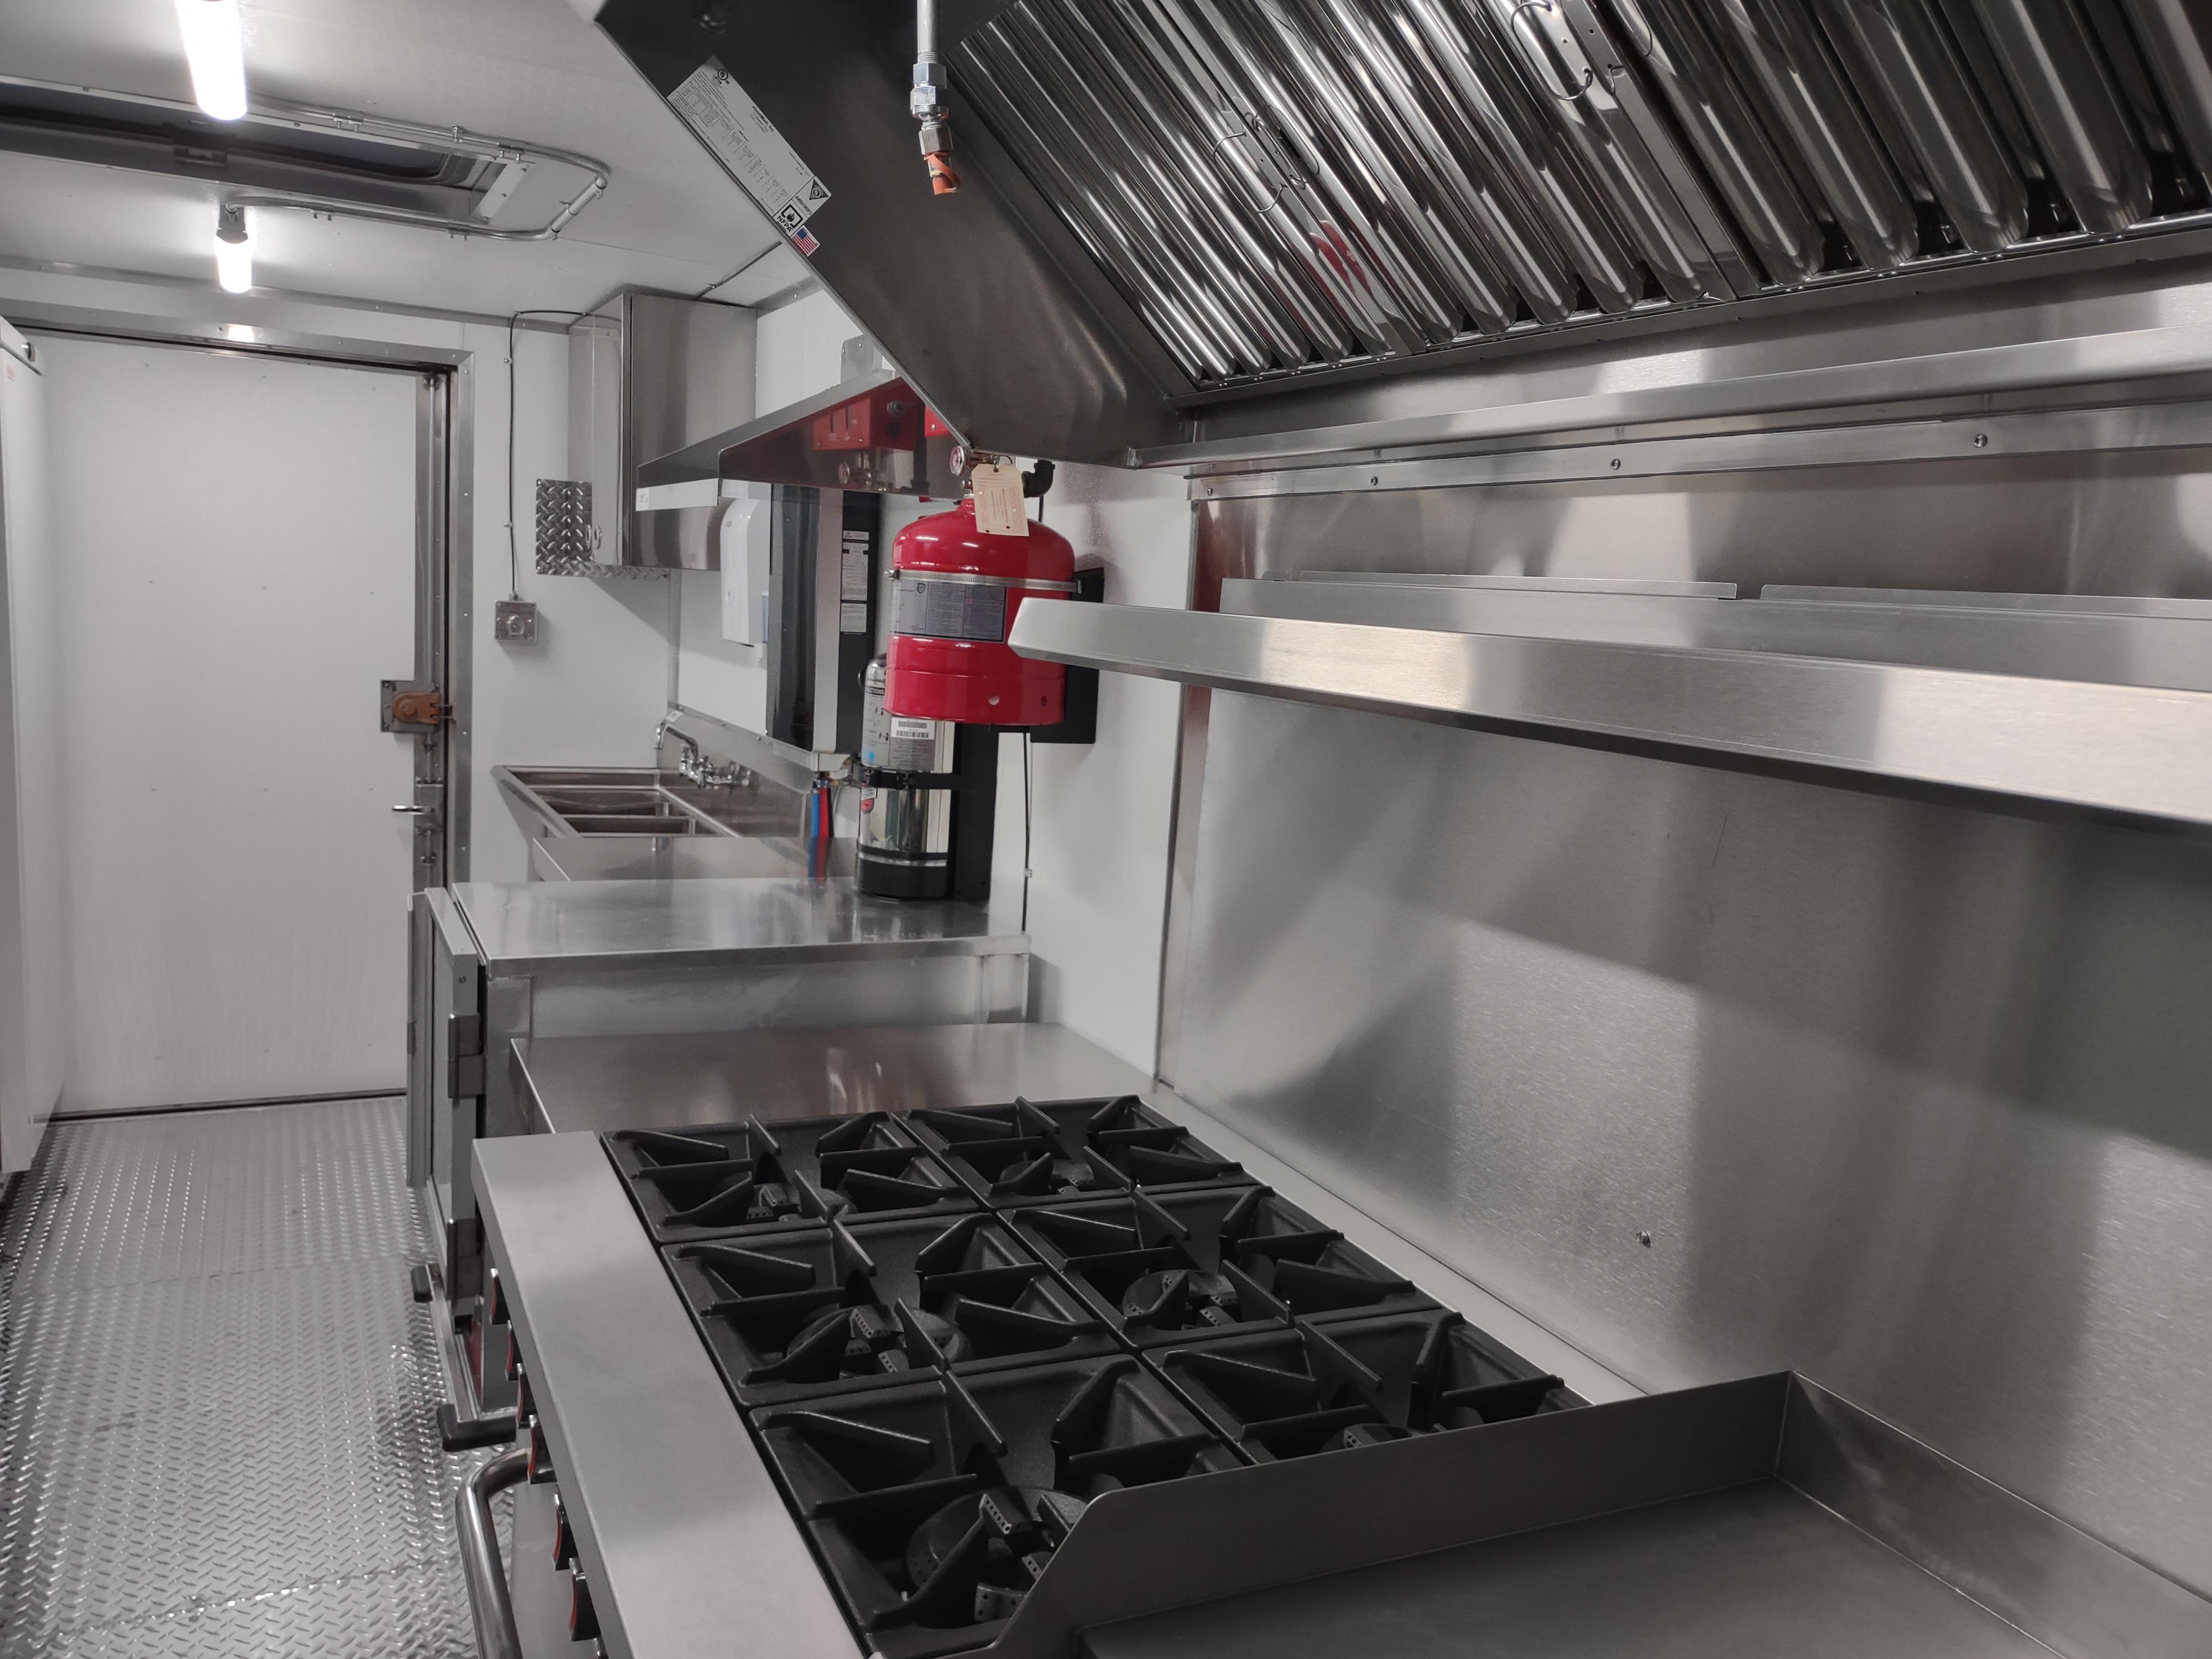 When it comes to the "Best" in Mobile Kitchen Fabrication, look no further than Mobile Kitchen Fabrication in Denver, CO. Our dedication to quality, innovation, and craftsmanship sets us apart as the top choice for turning your mobile kitchen vision into a reality.